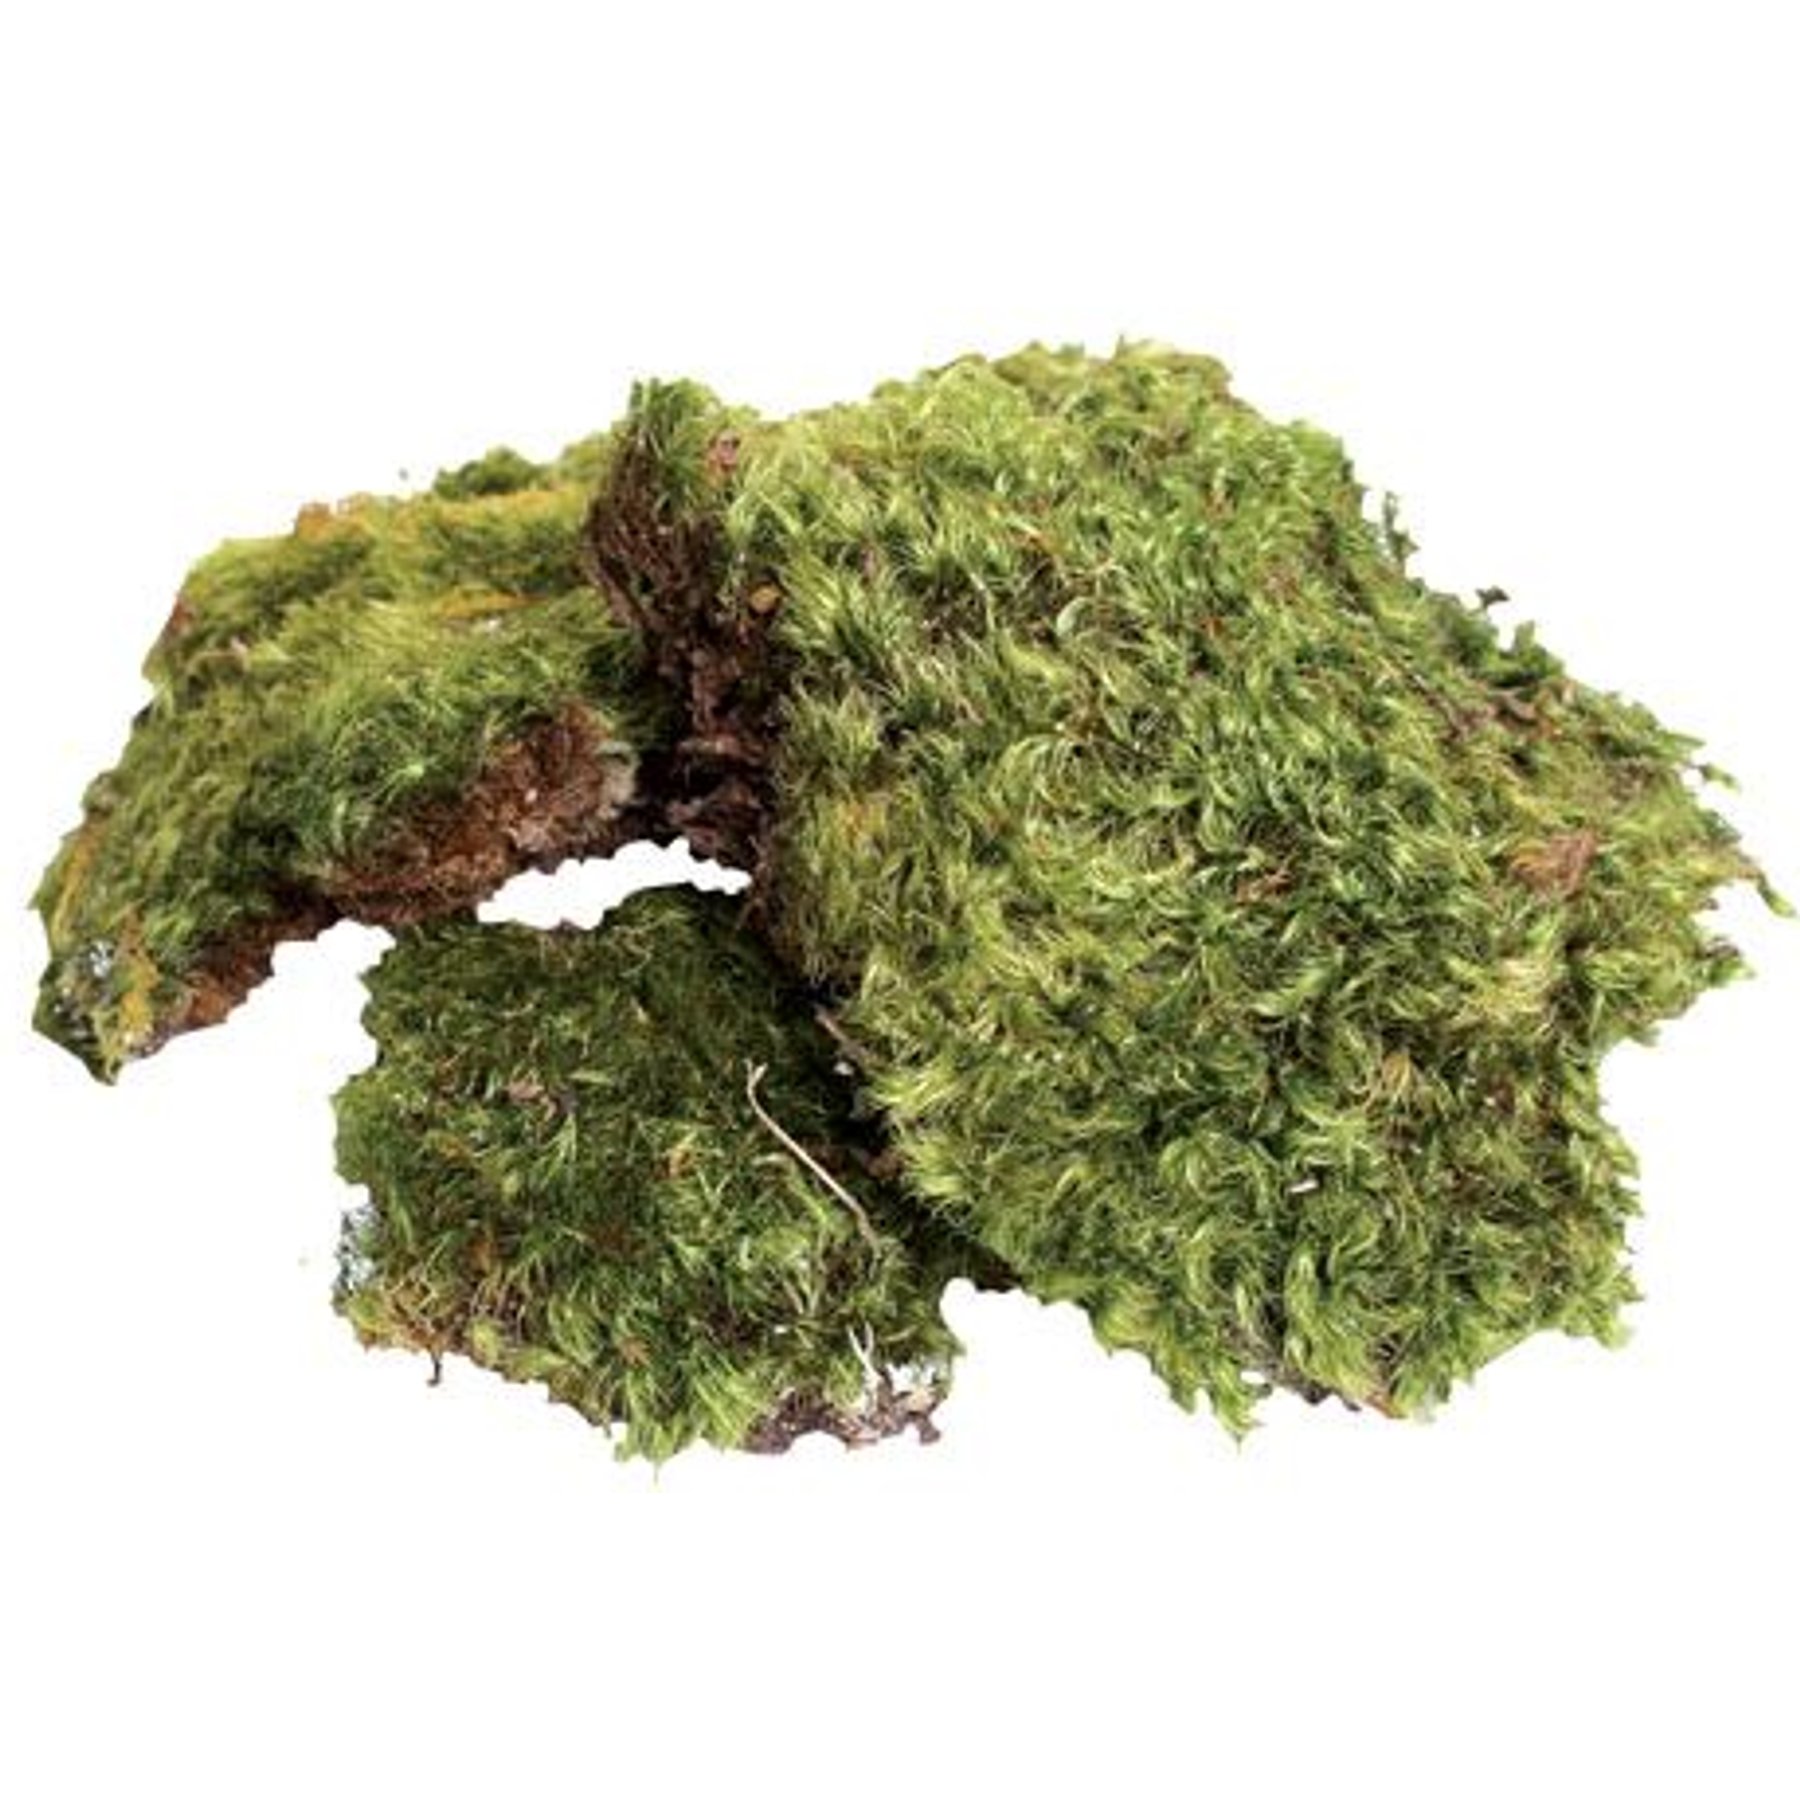 Zoo Med All Natural Frog Moss 80 cu/in for sale